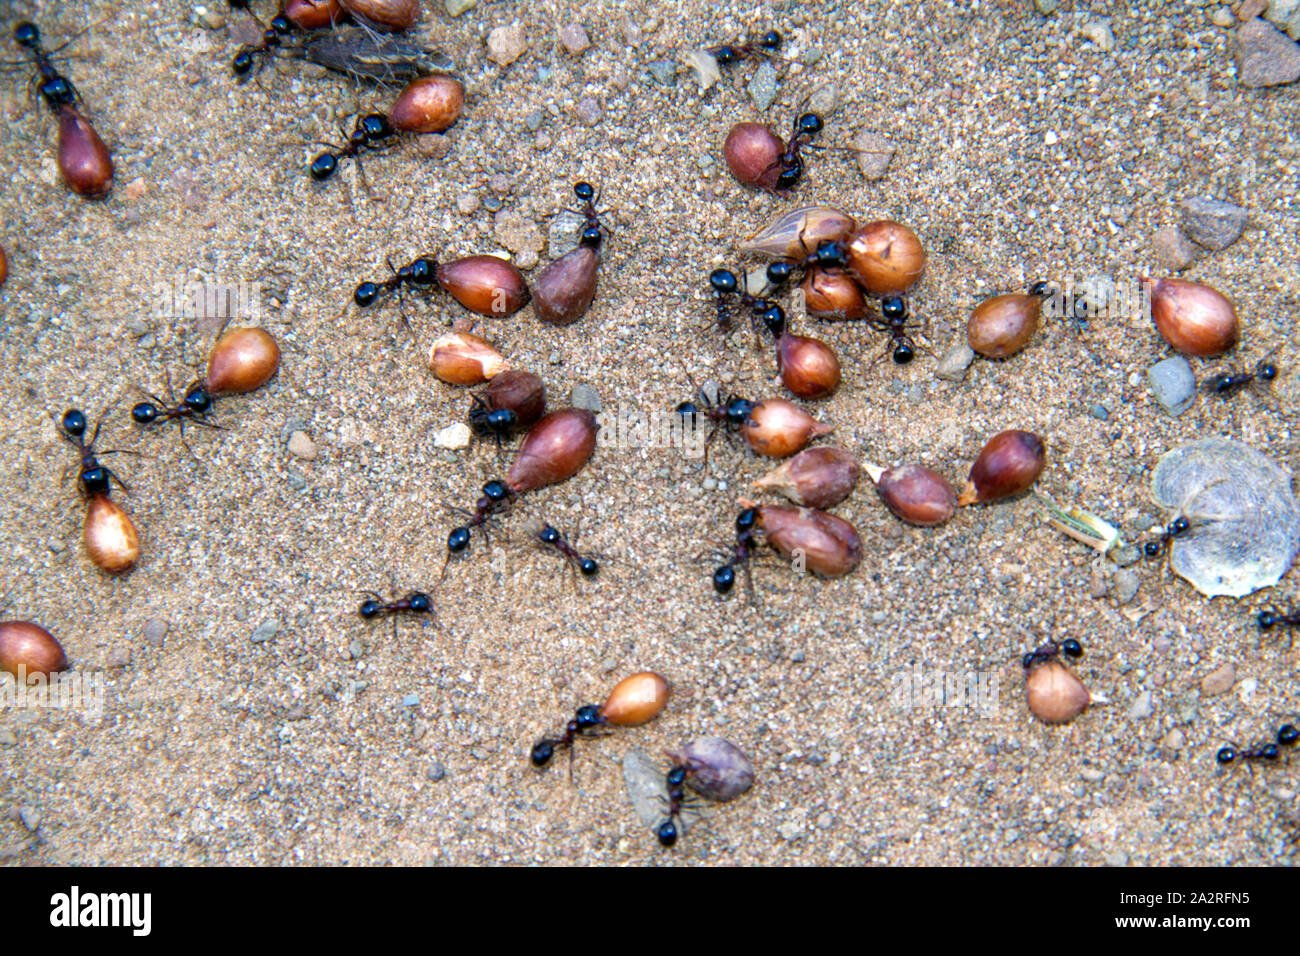 Several black and brown ants carrying large seeds Stock Photo